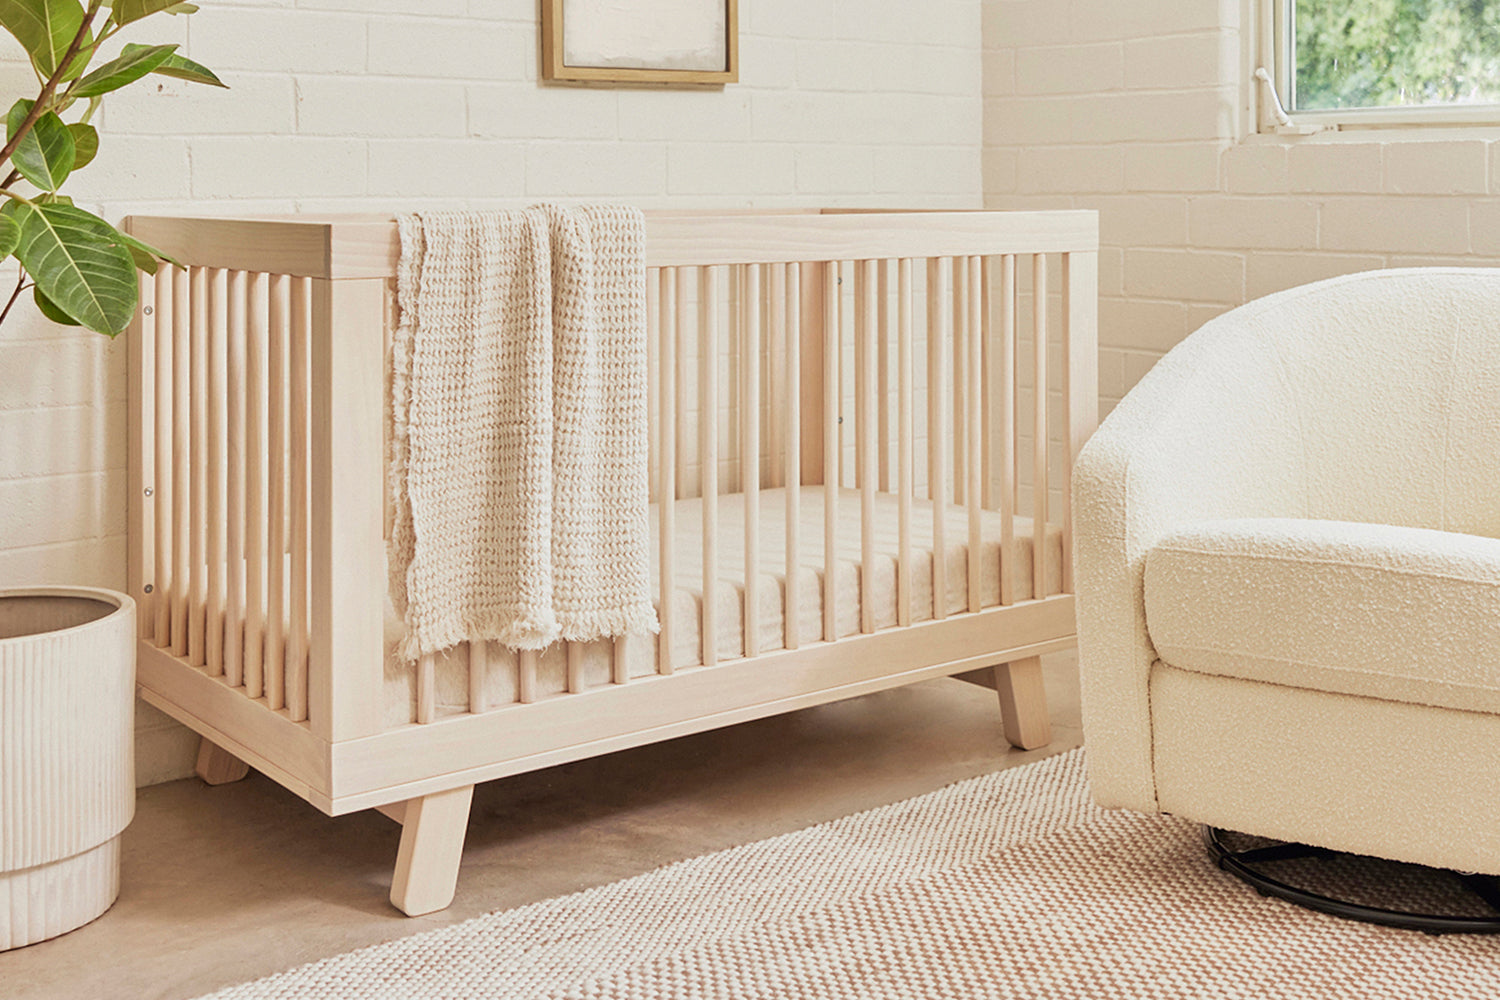 Babyletto Greenguard gold certified Hudson Crib in a nursery